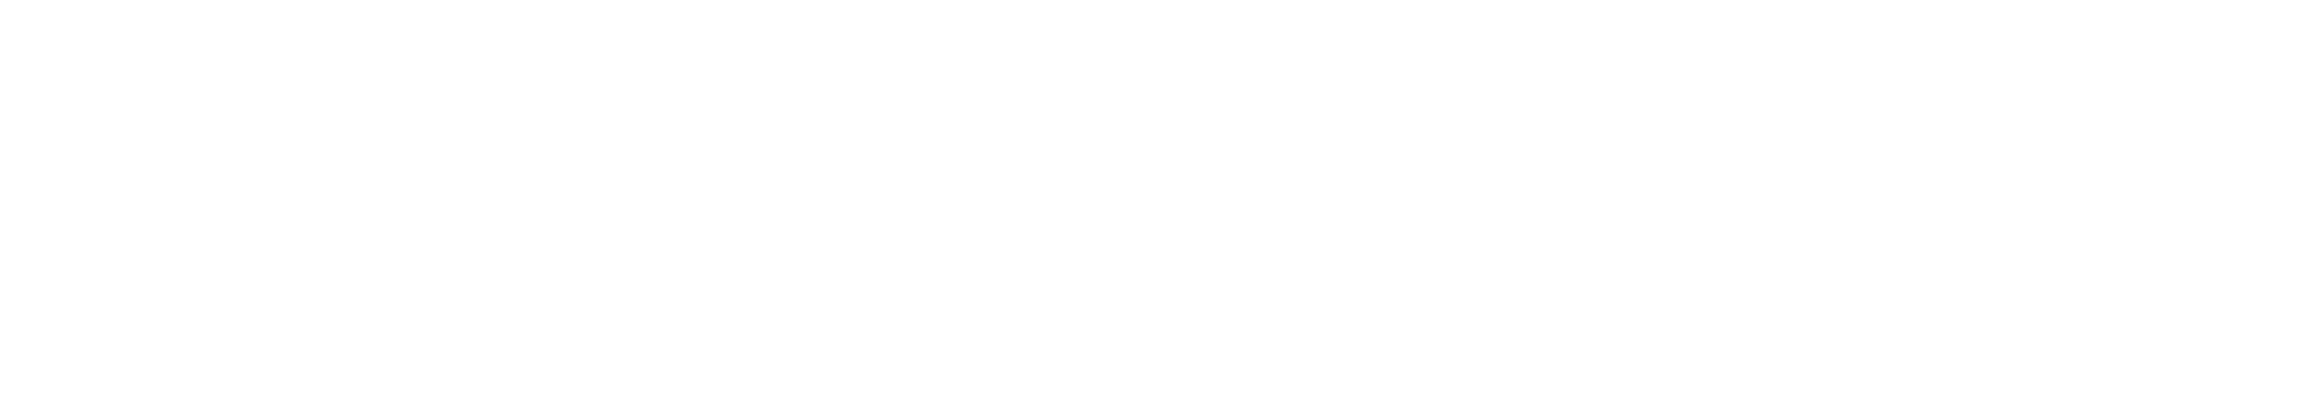 Harbor Group Management logo for Yearling Plaza